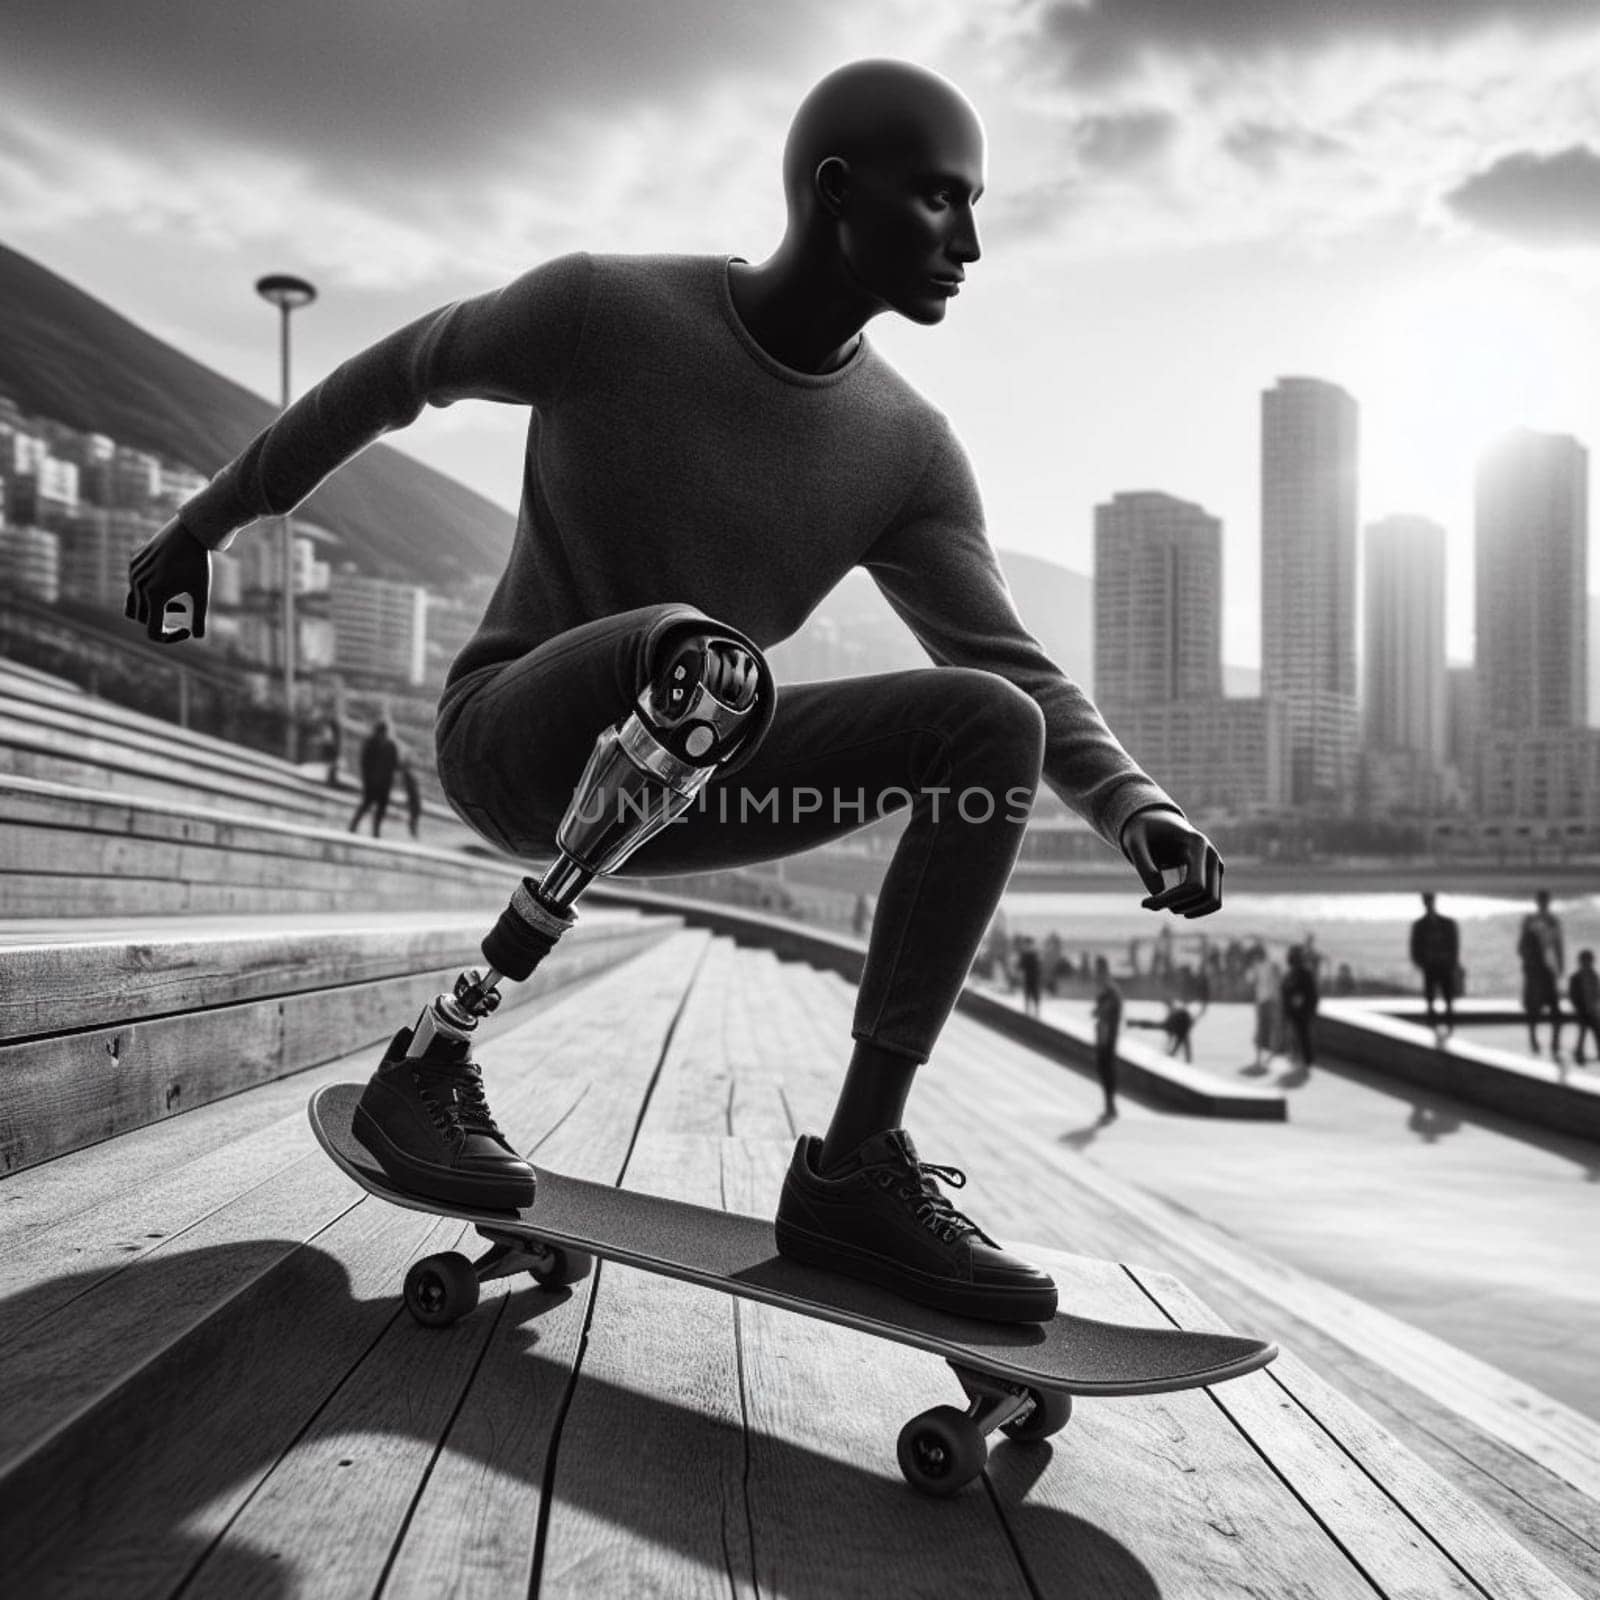 A man with a prosthetic leg is skateboarding down a sidewalk at sunset in a city setting by verbano